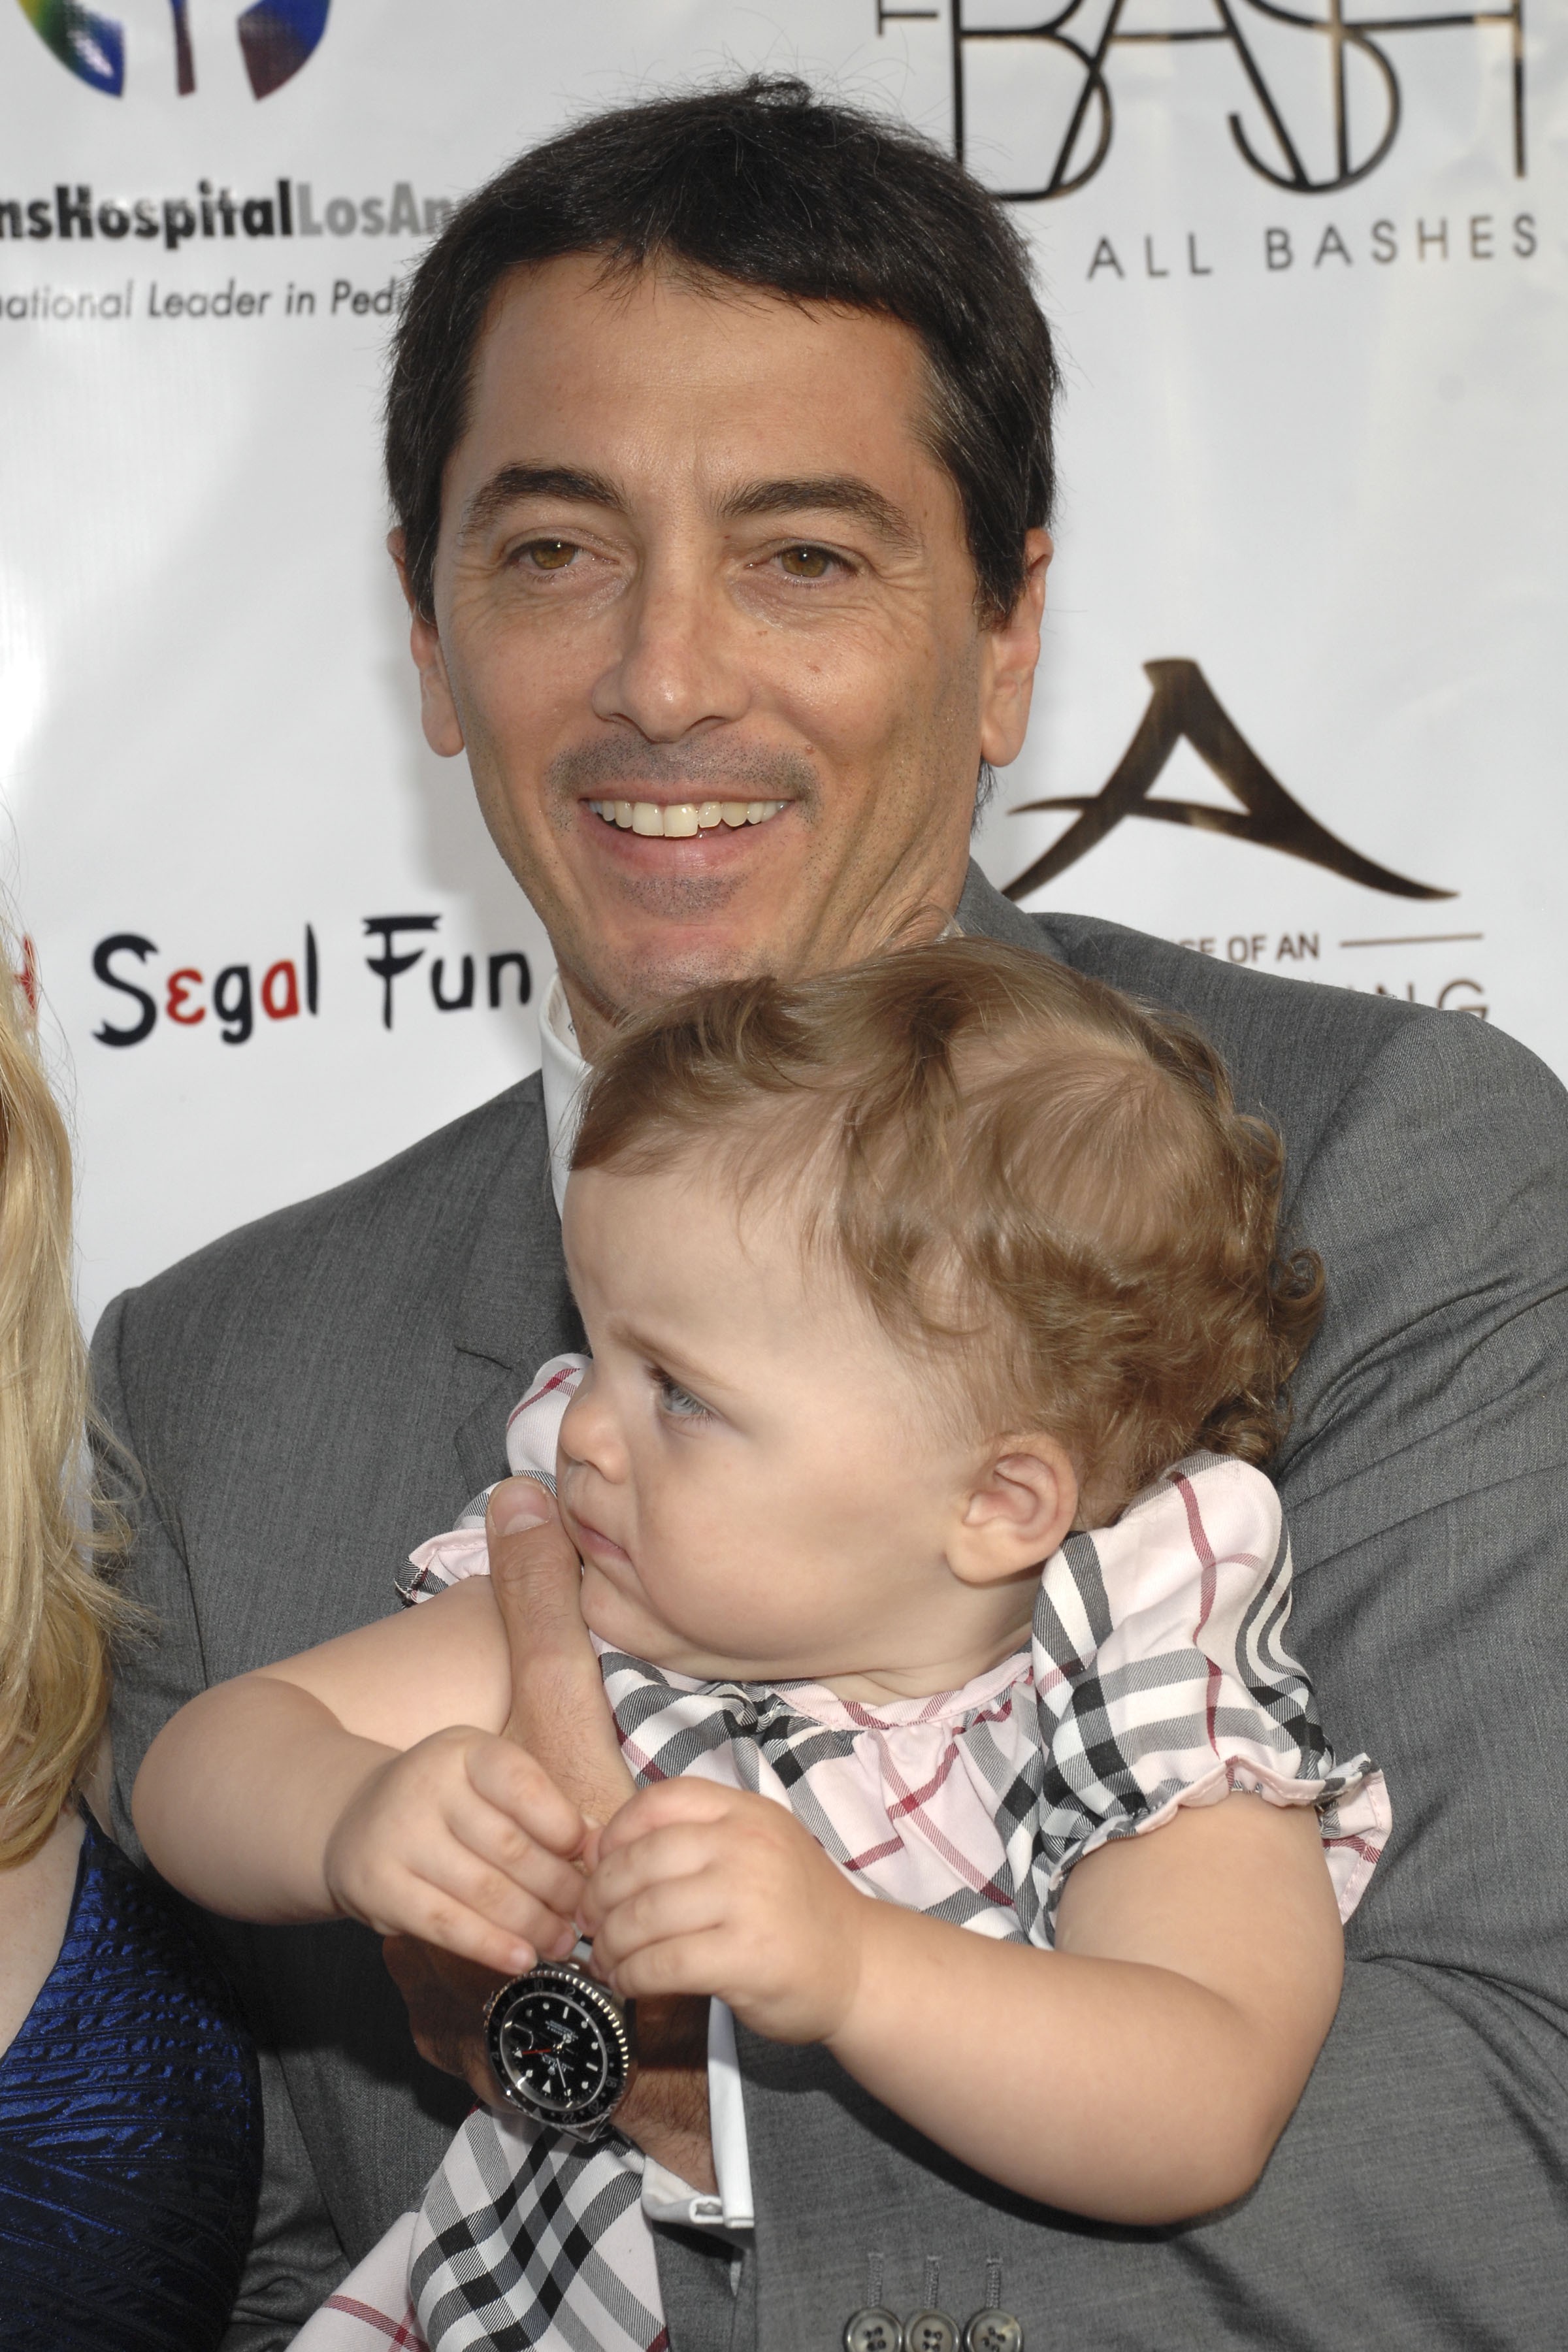 Scott Baio and Bailey Baio attend The Bash Of All Bashes at Crustacean on May 17, 2009 in Beverly Hills, California. | Source: Getty Images